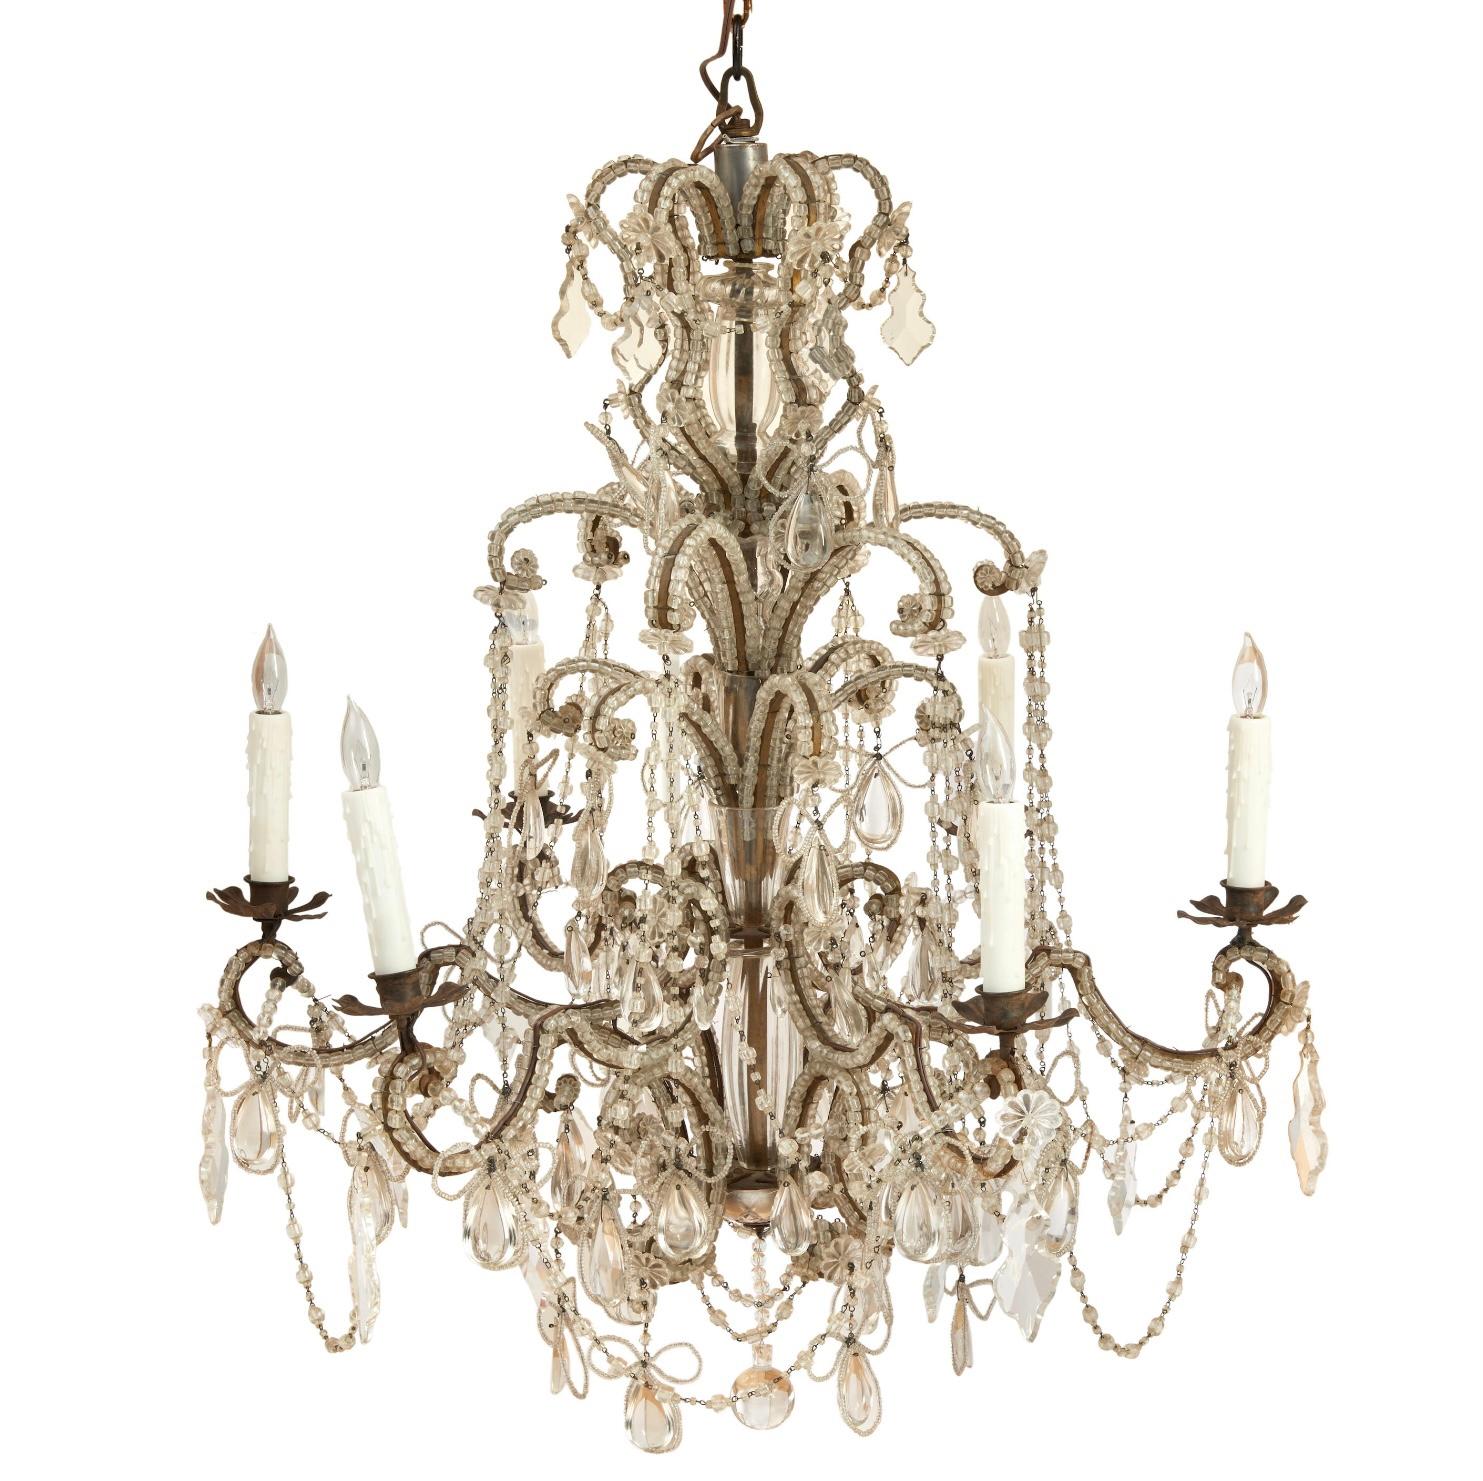 19th Century Italian Beaded Crystal Chandelier With Six Lights For Sale 3